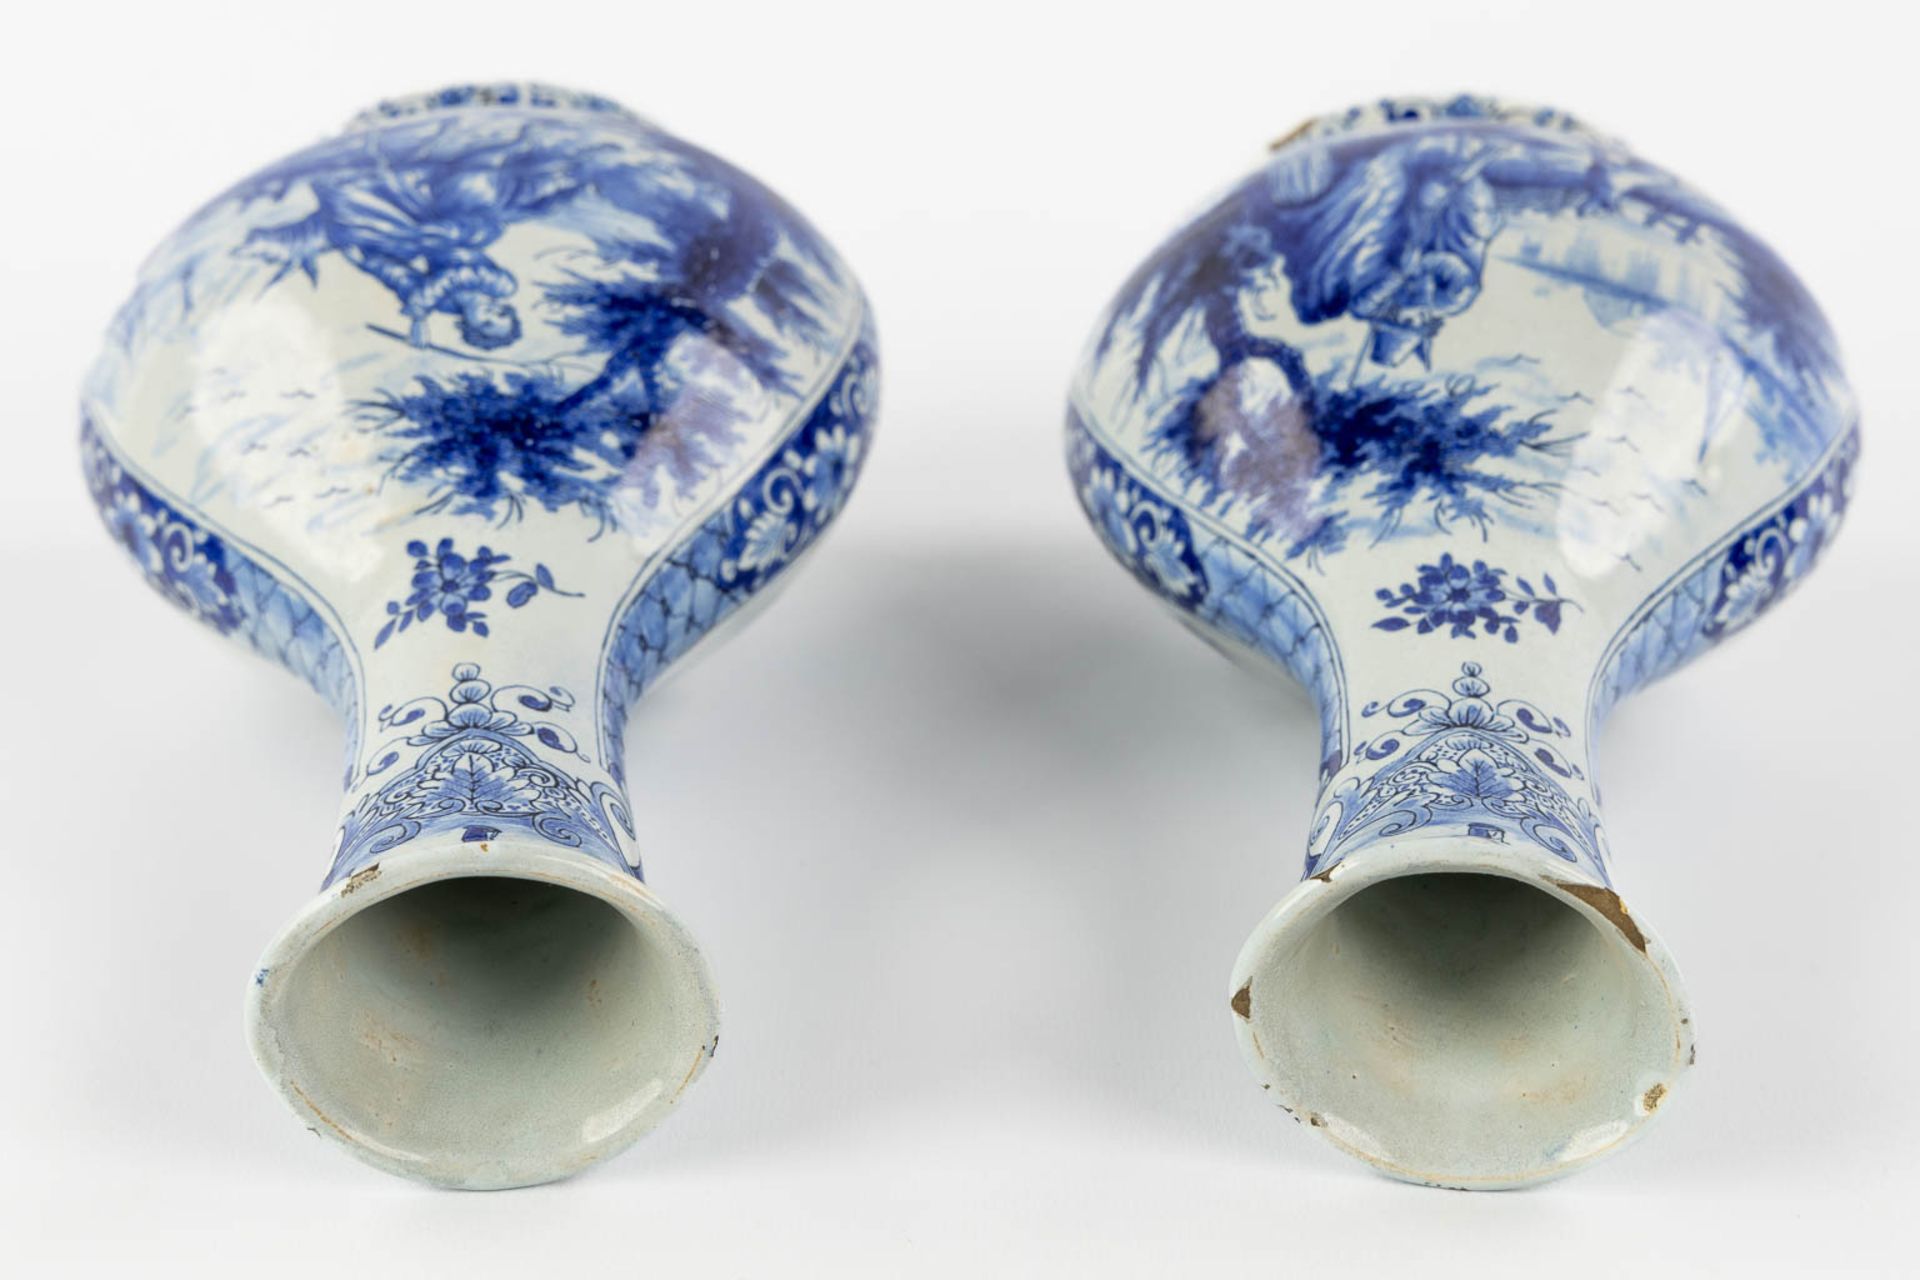 Geertrui Verstelle, Delft, a pair of vases with a landscape decor. Mid 18th C. (L:9 x W:14 x H:26,5 - Image 9 of 15